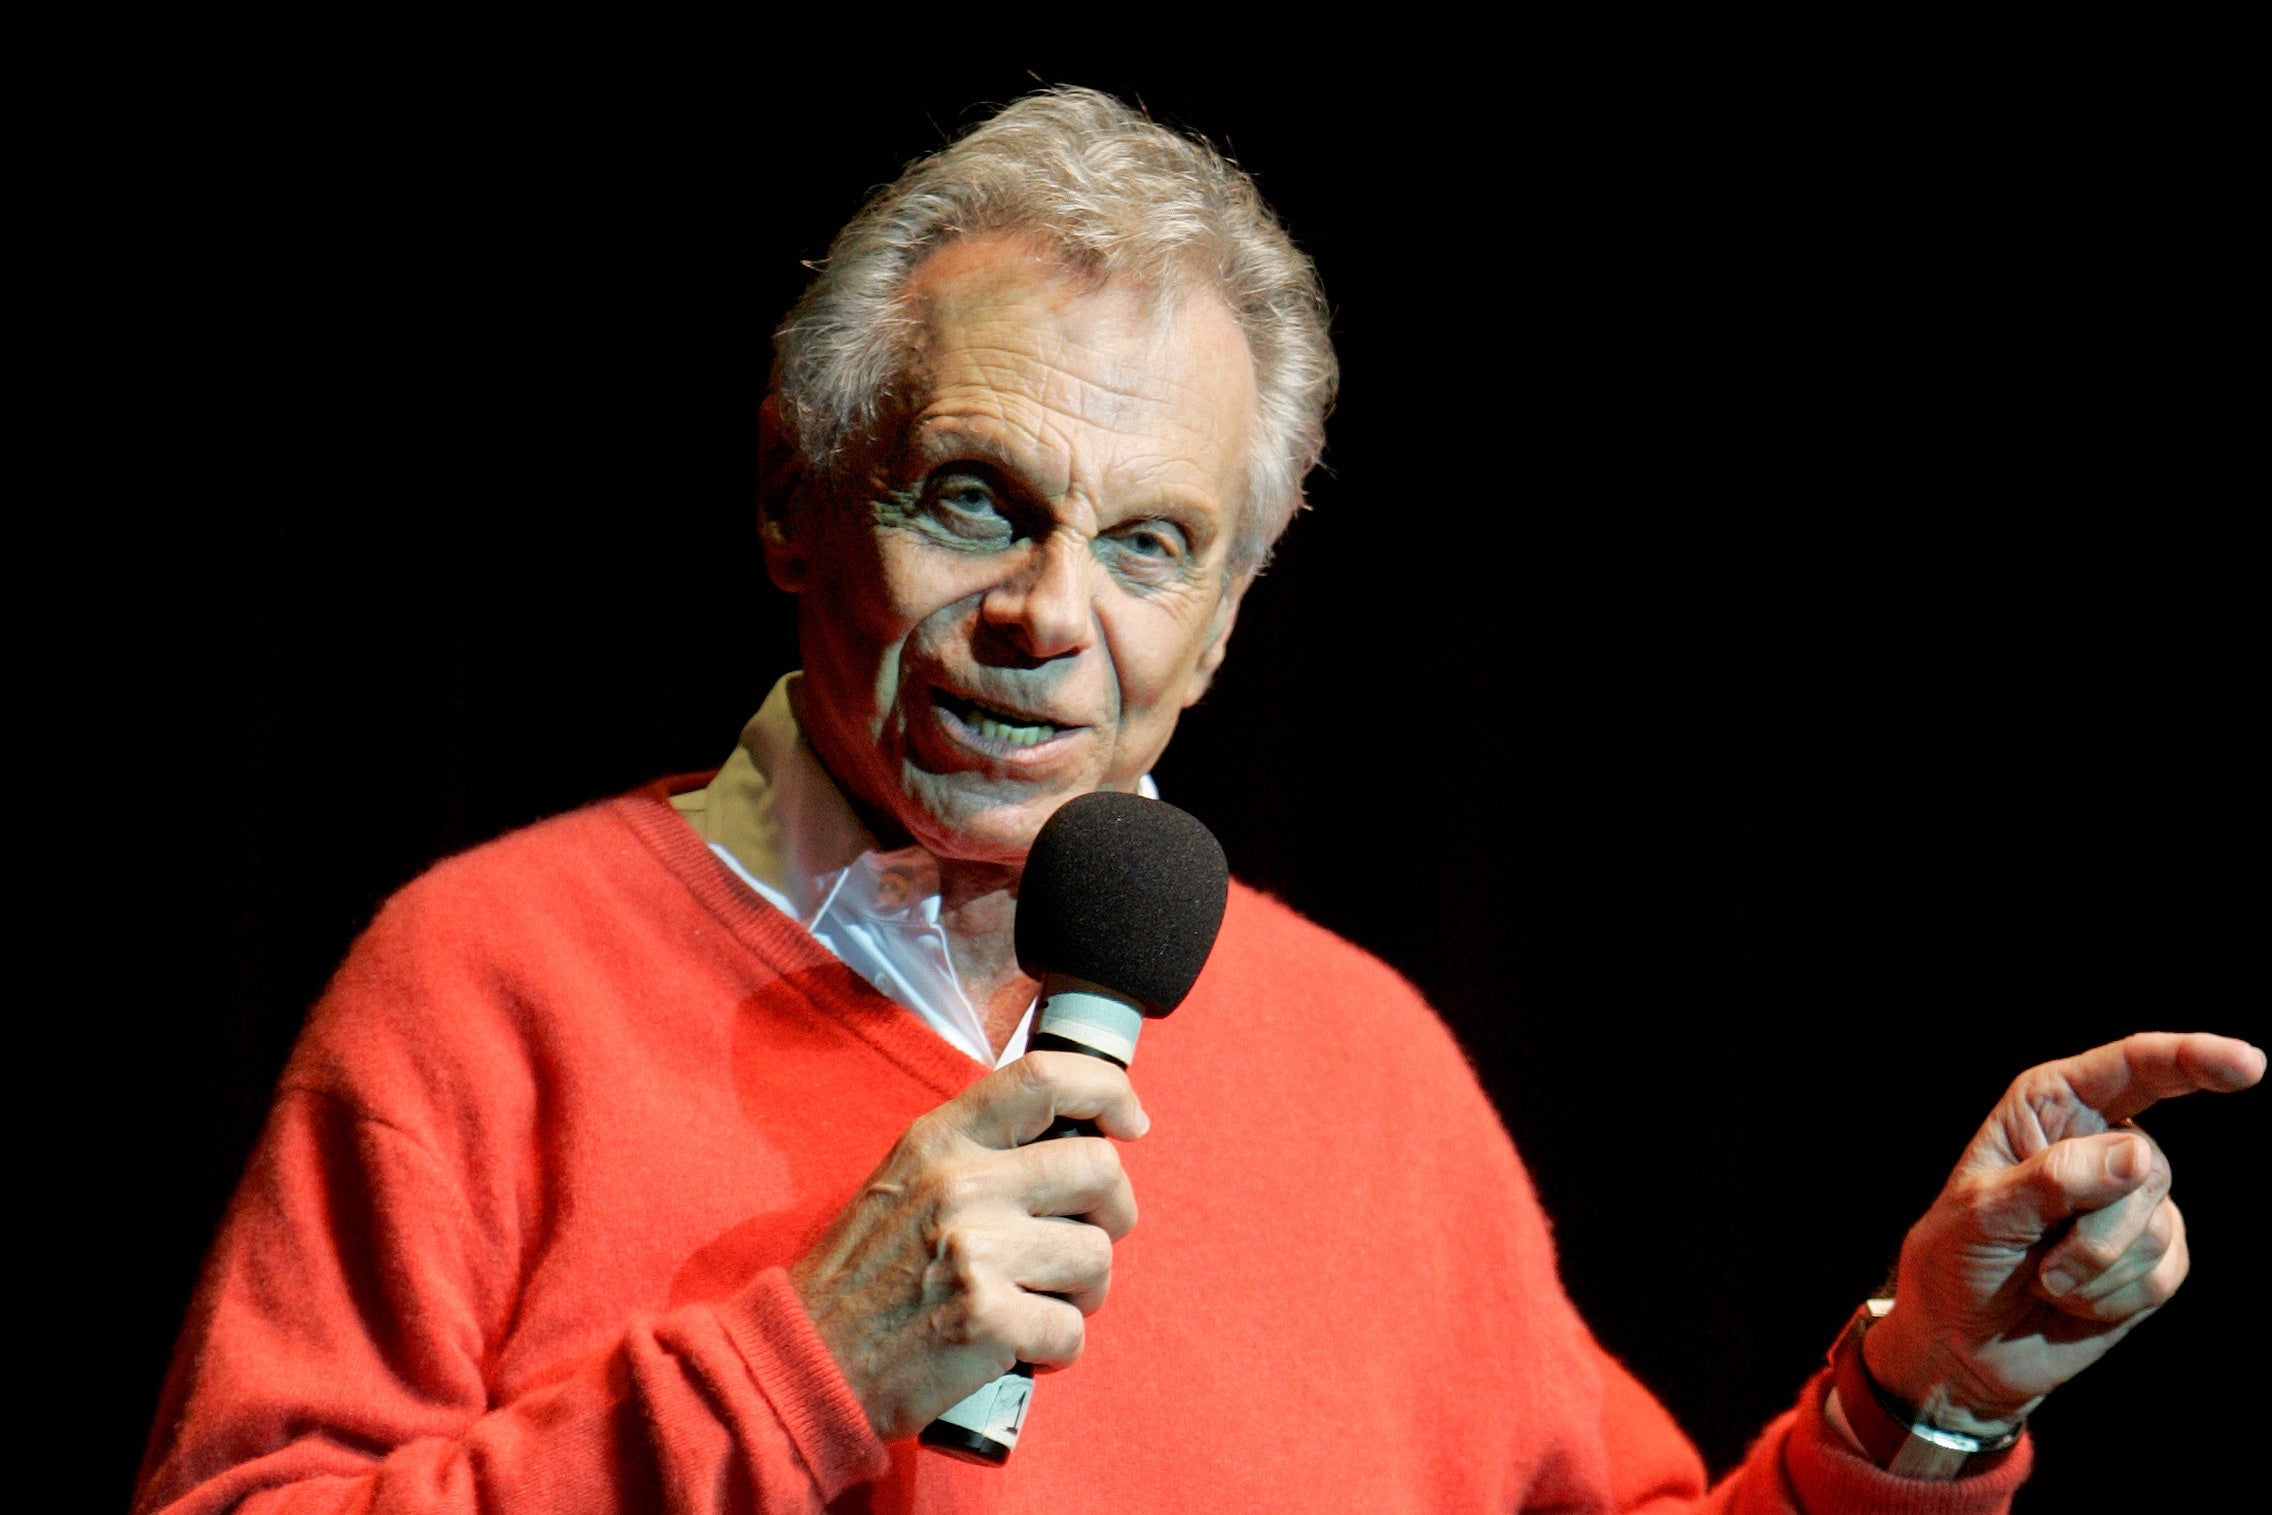 An older Mort Sahl in a red sweater onstage holding a microphone and pointing.